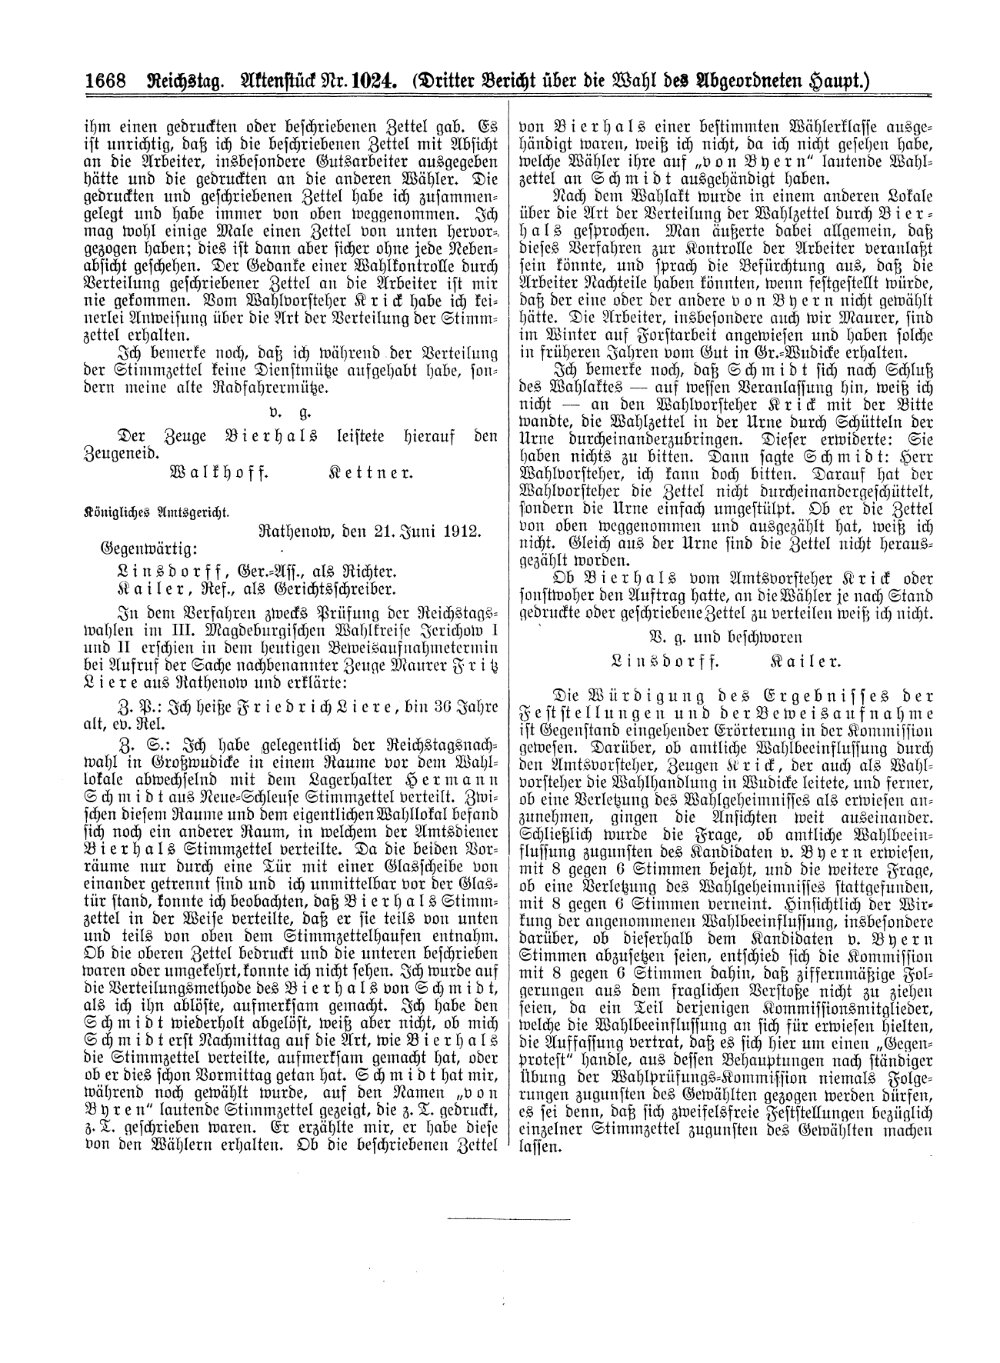 Scan of page 1668